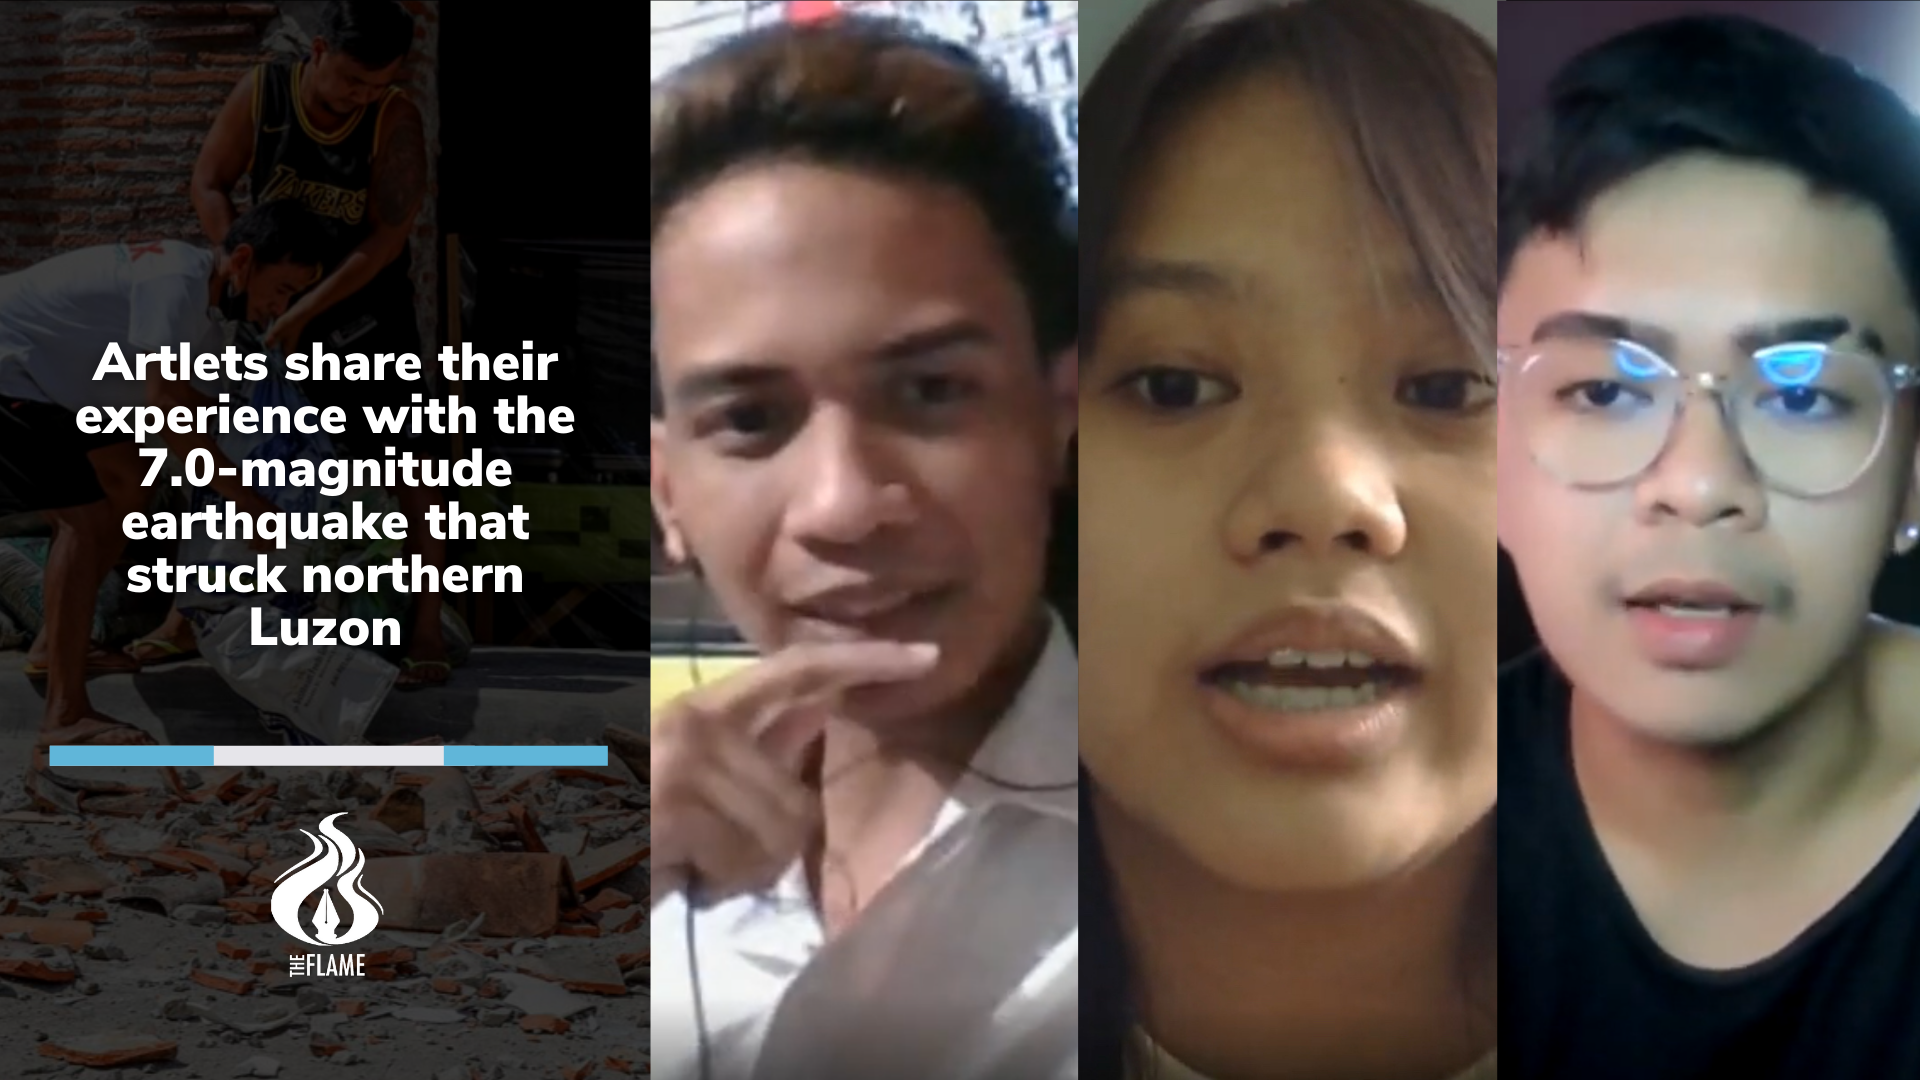 Artlets share their experience with the 7.0-magnitude earthquake that struck northern Luzon